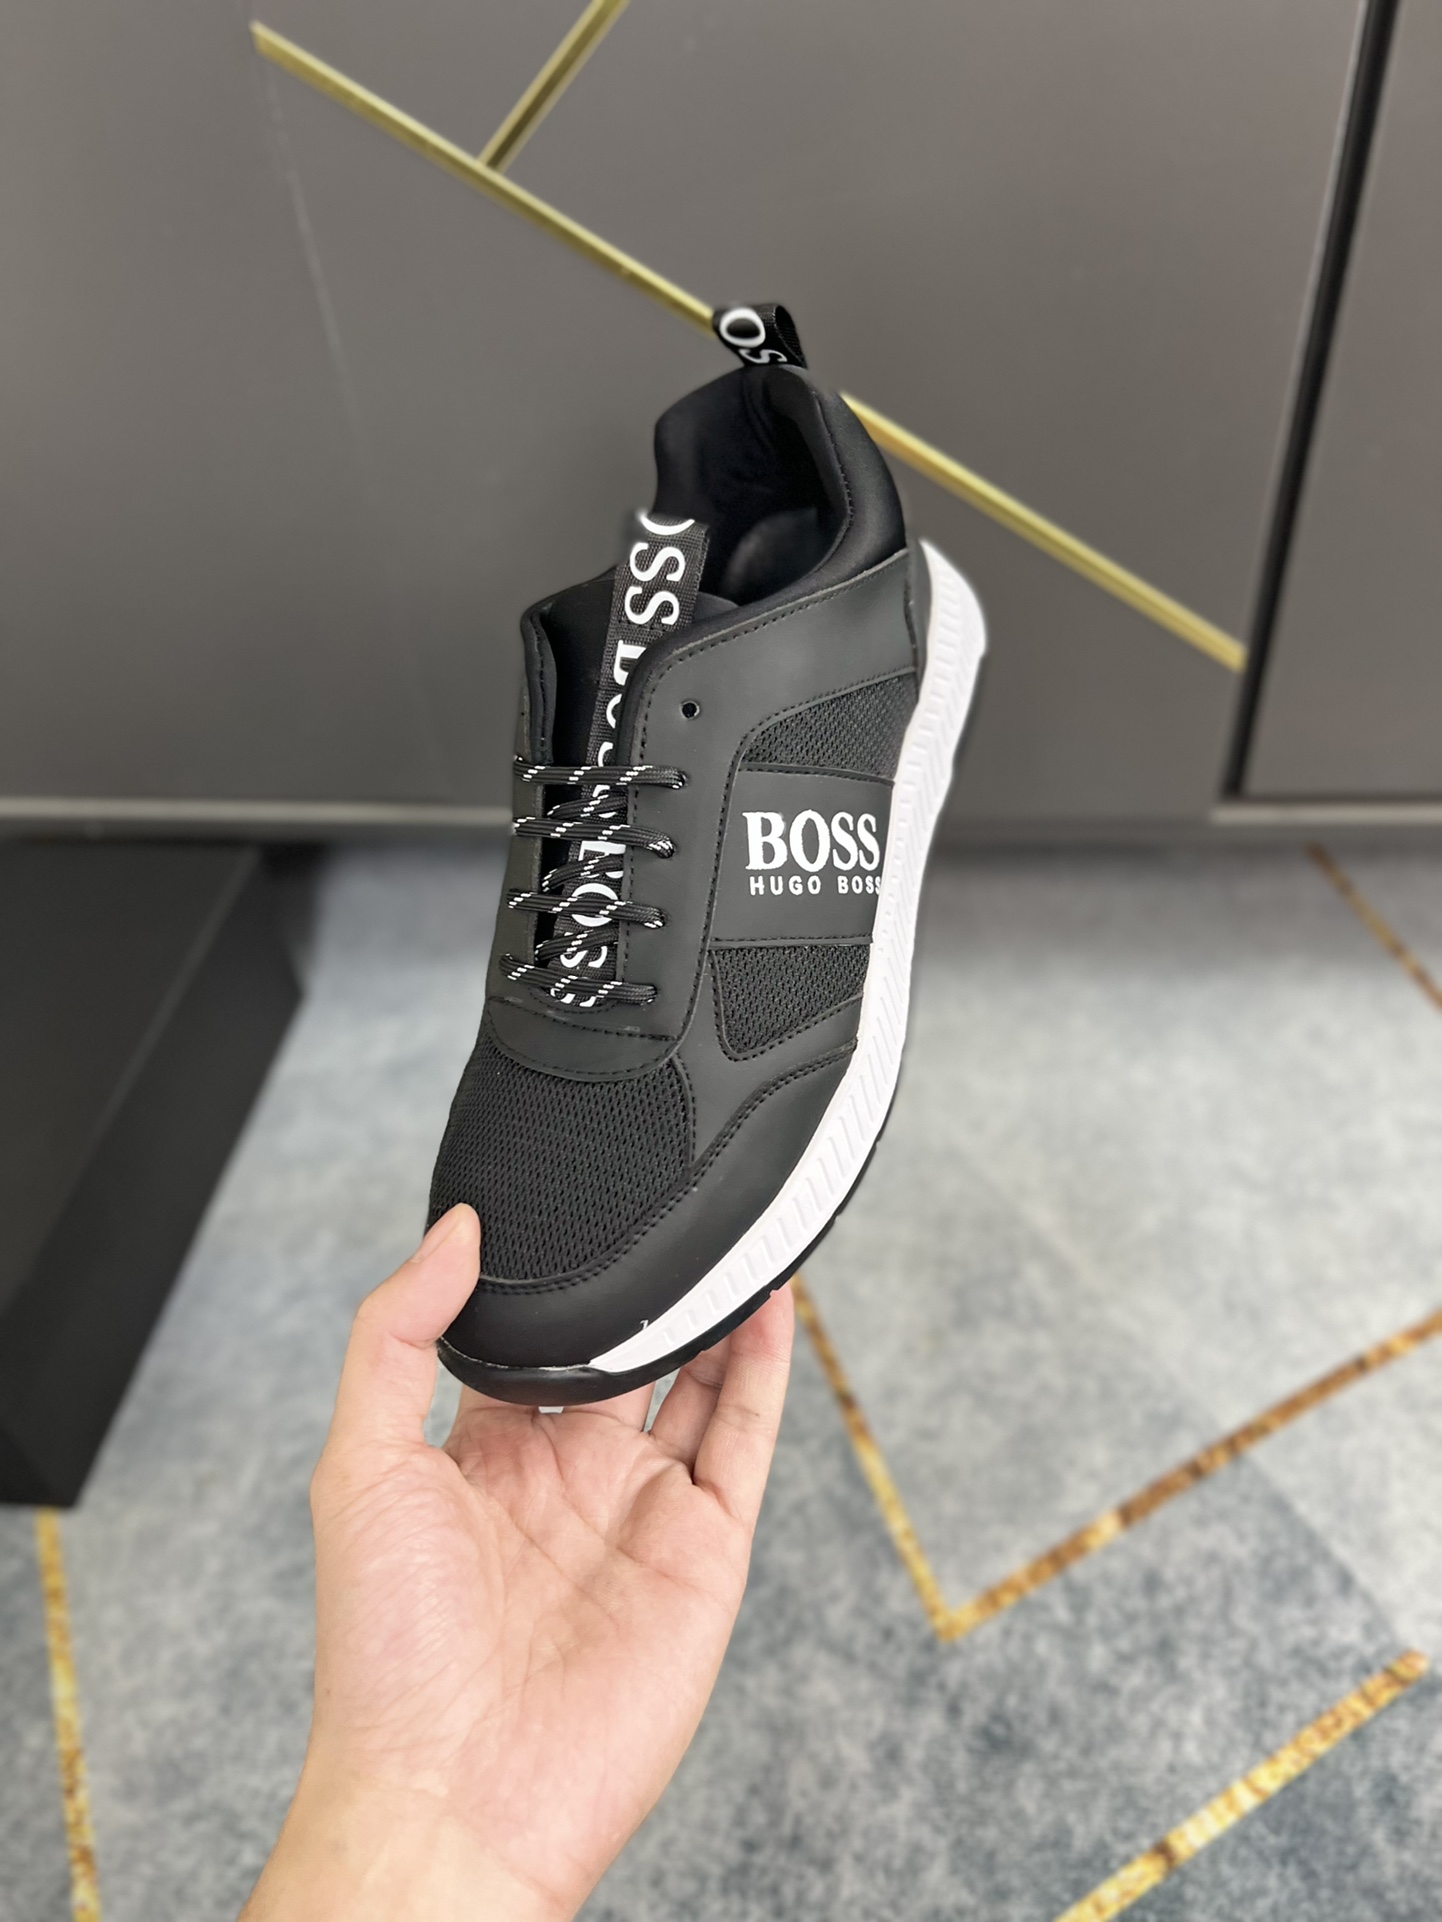 :❤️❤️❤️【BOSS】Sports men's shoes have become a never-ending fashion darling with their classic design